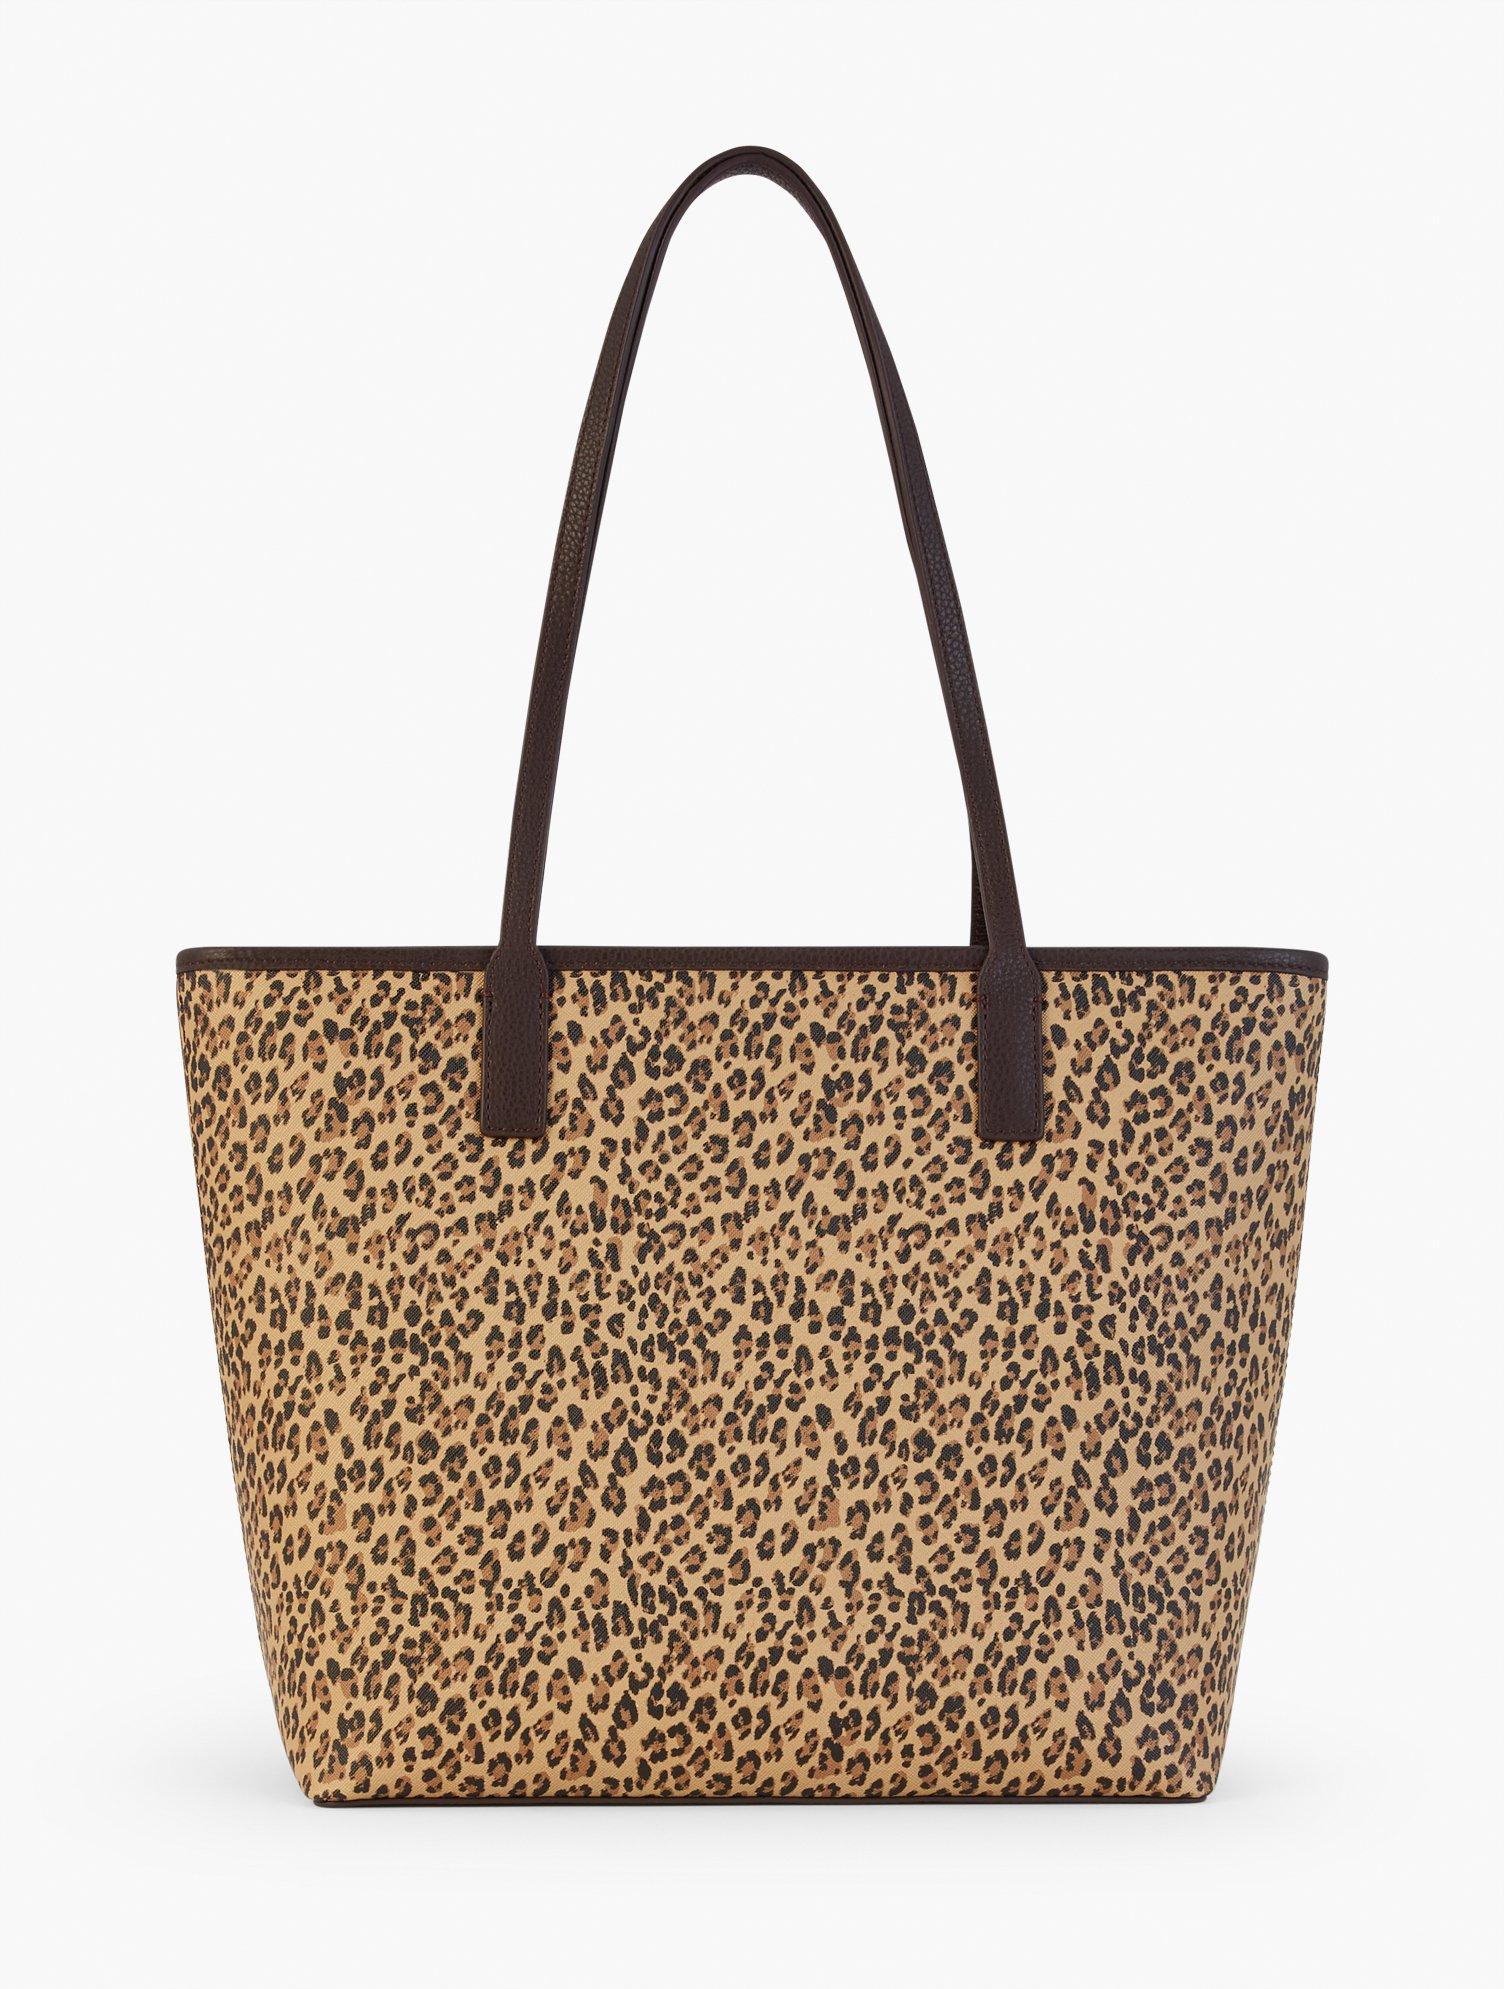 Talbots Leopard Print Tote in White | Lyst